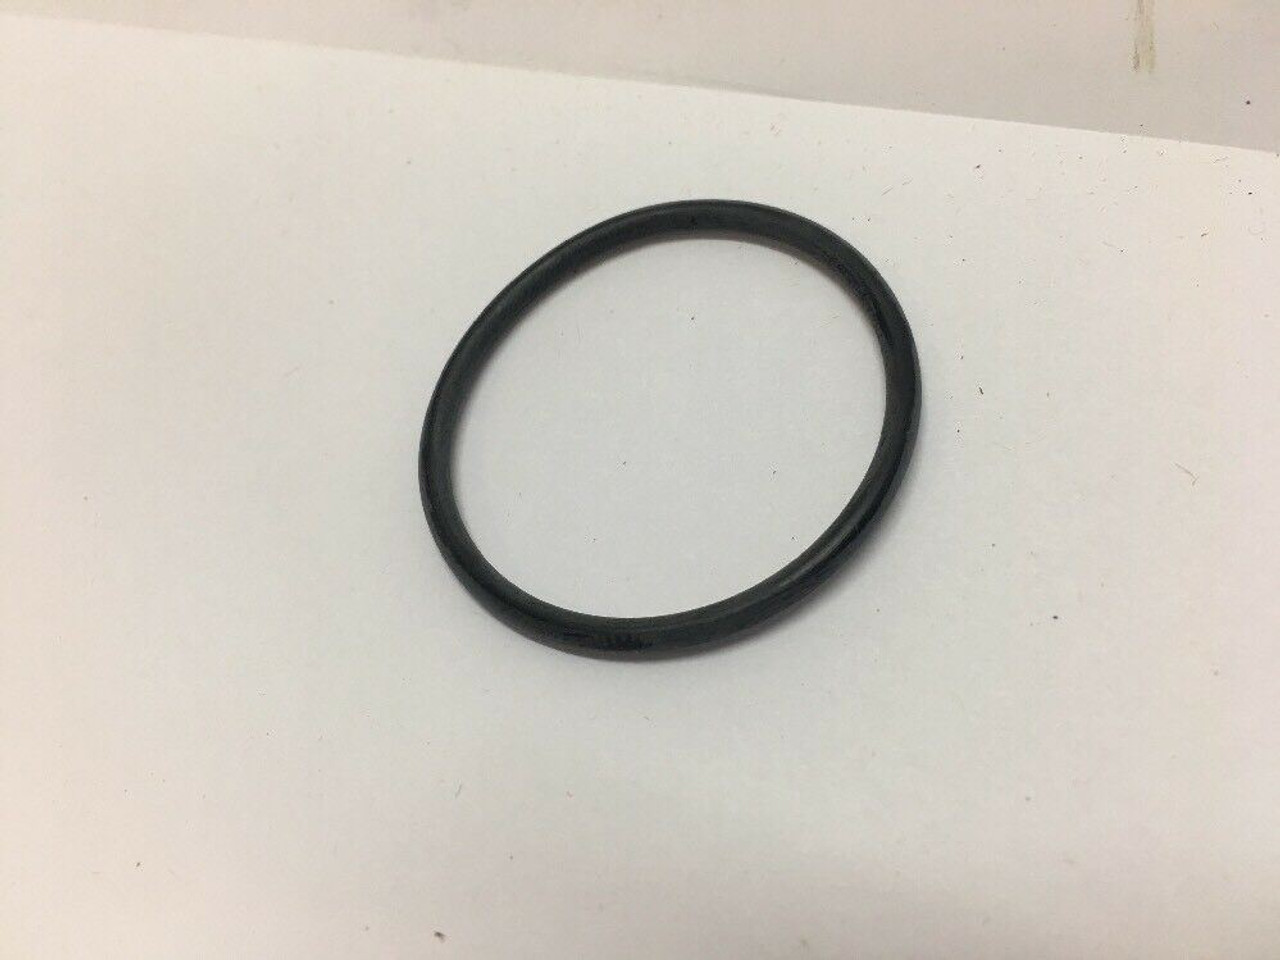 O-Ring 2-127 N602-70 Parker-Hannifin Rubber Lot of 5